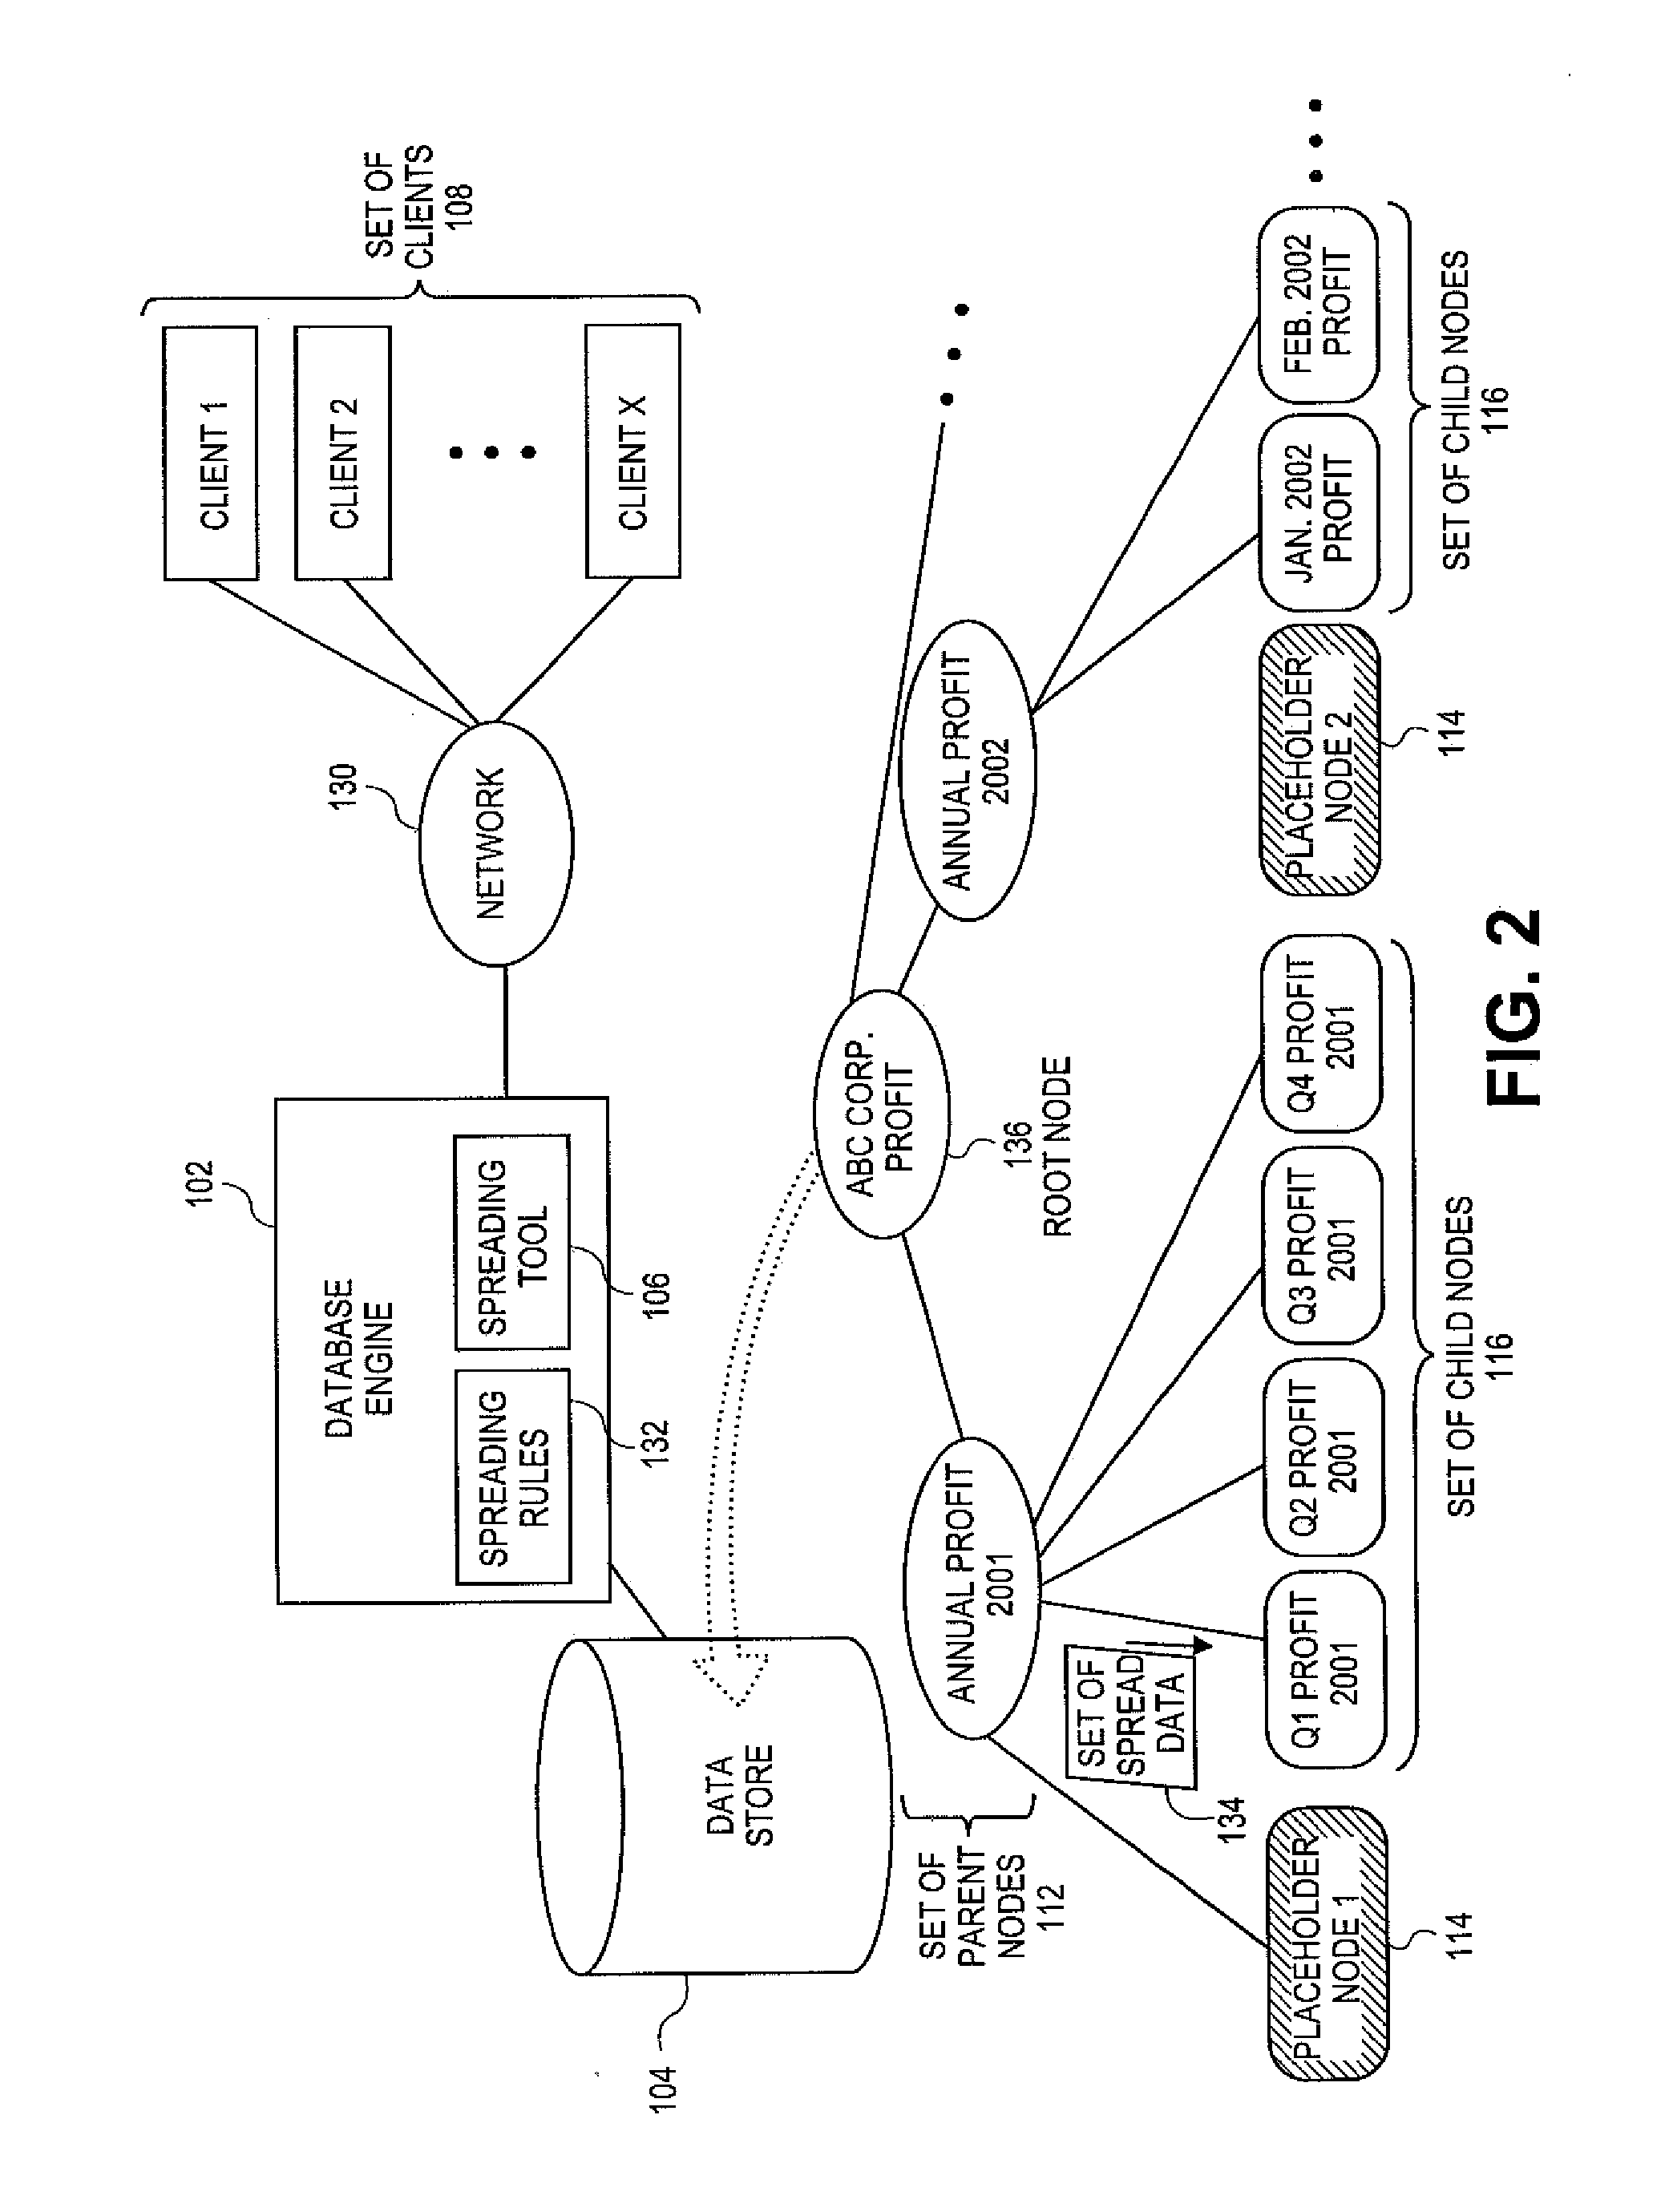 Systems and methods for generating an optimized output range for a data distribution in a hierarchical database